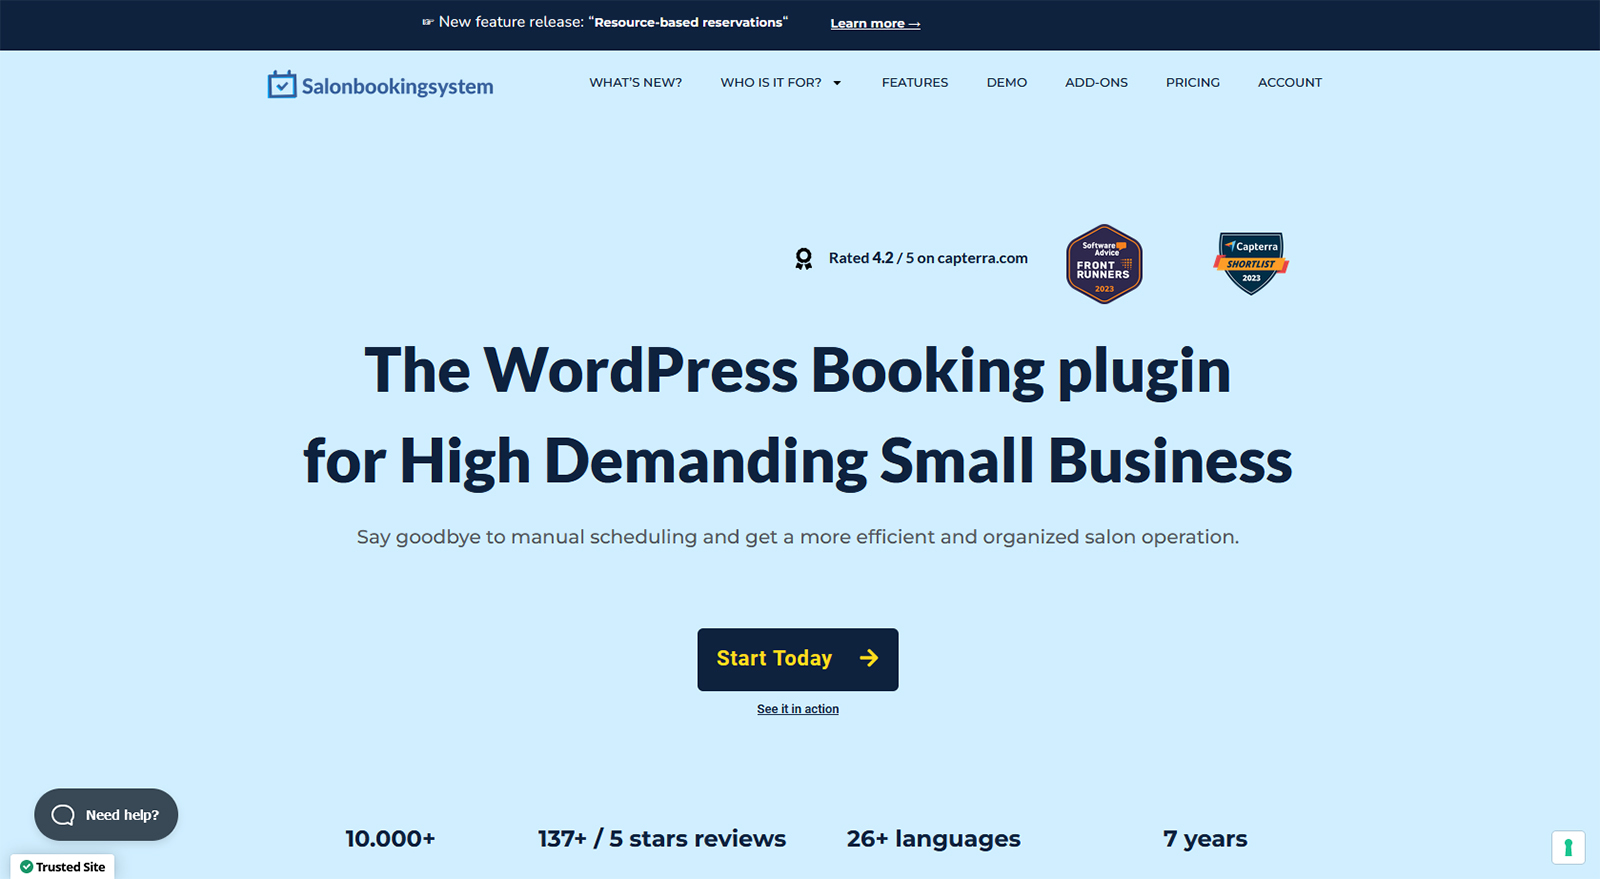 Image of Salon Booking system WordPress plugin with customizable service section in lightskyblue, midnightblue, and white color palette.